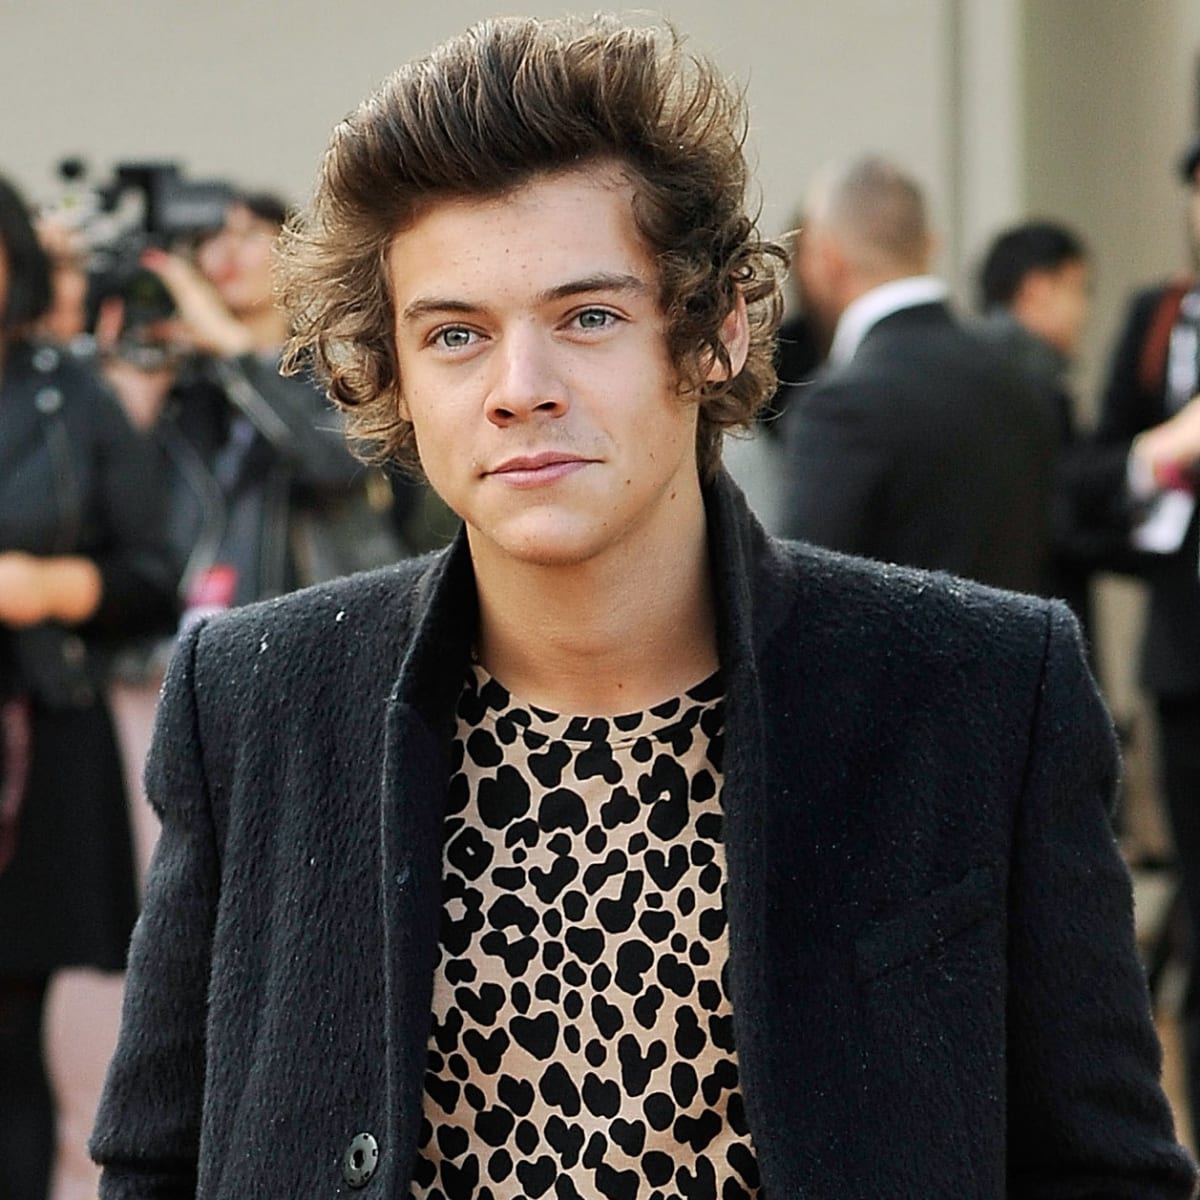 Great Outfits in Fashion History: Harry Styles in Leopard-Print